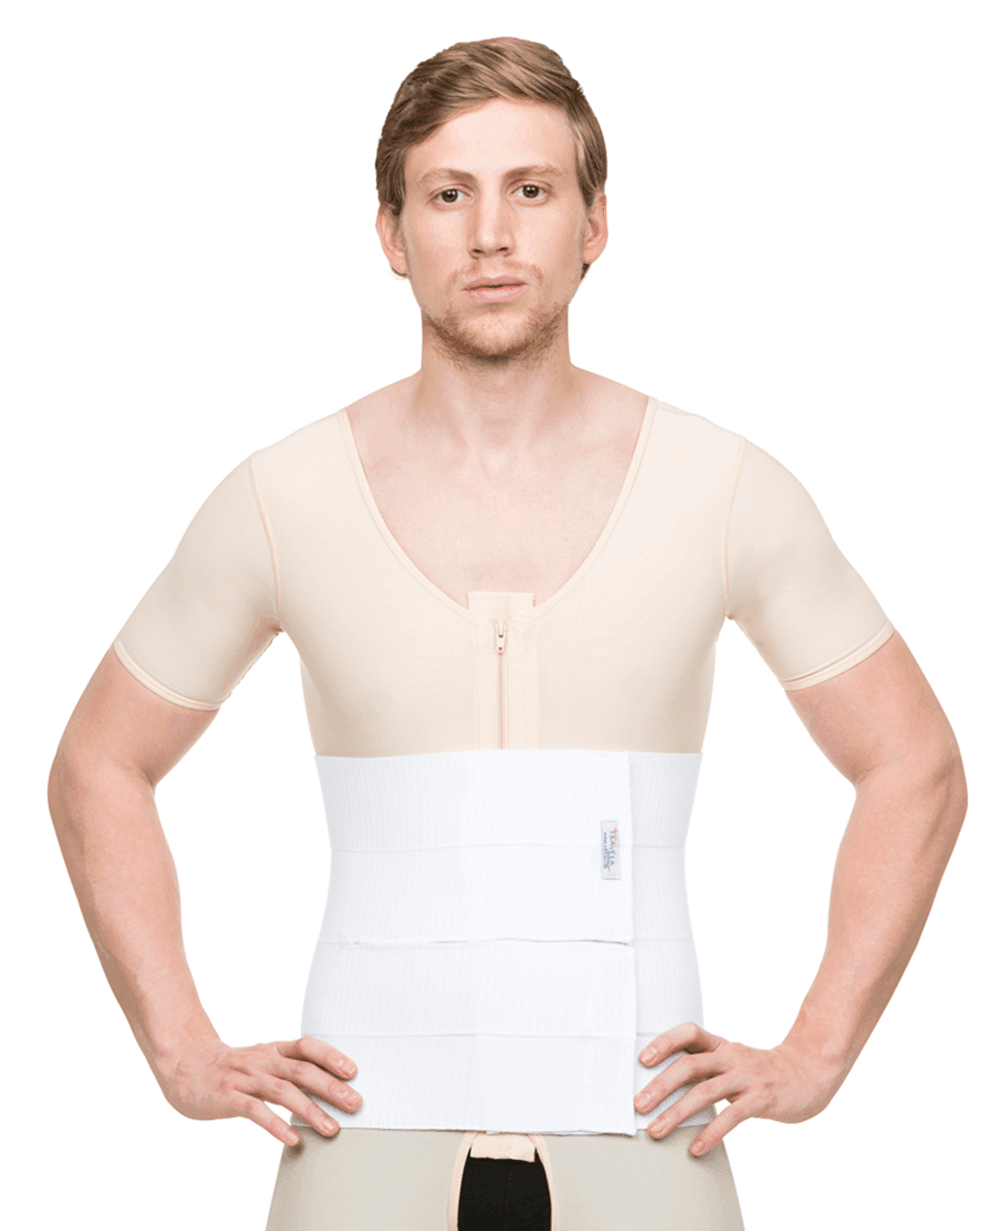 High Waist Abdominal Below Knee Compression Girdle with Separating Zipper  (GR05-SZ) (XS, Beige) at  Women's Clothing store